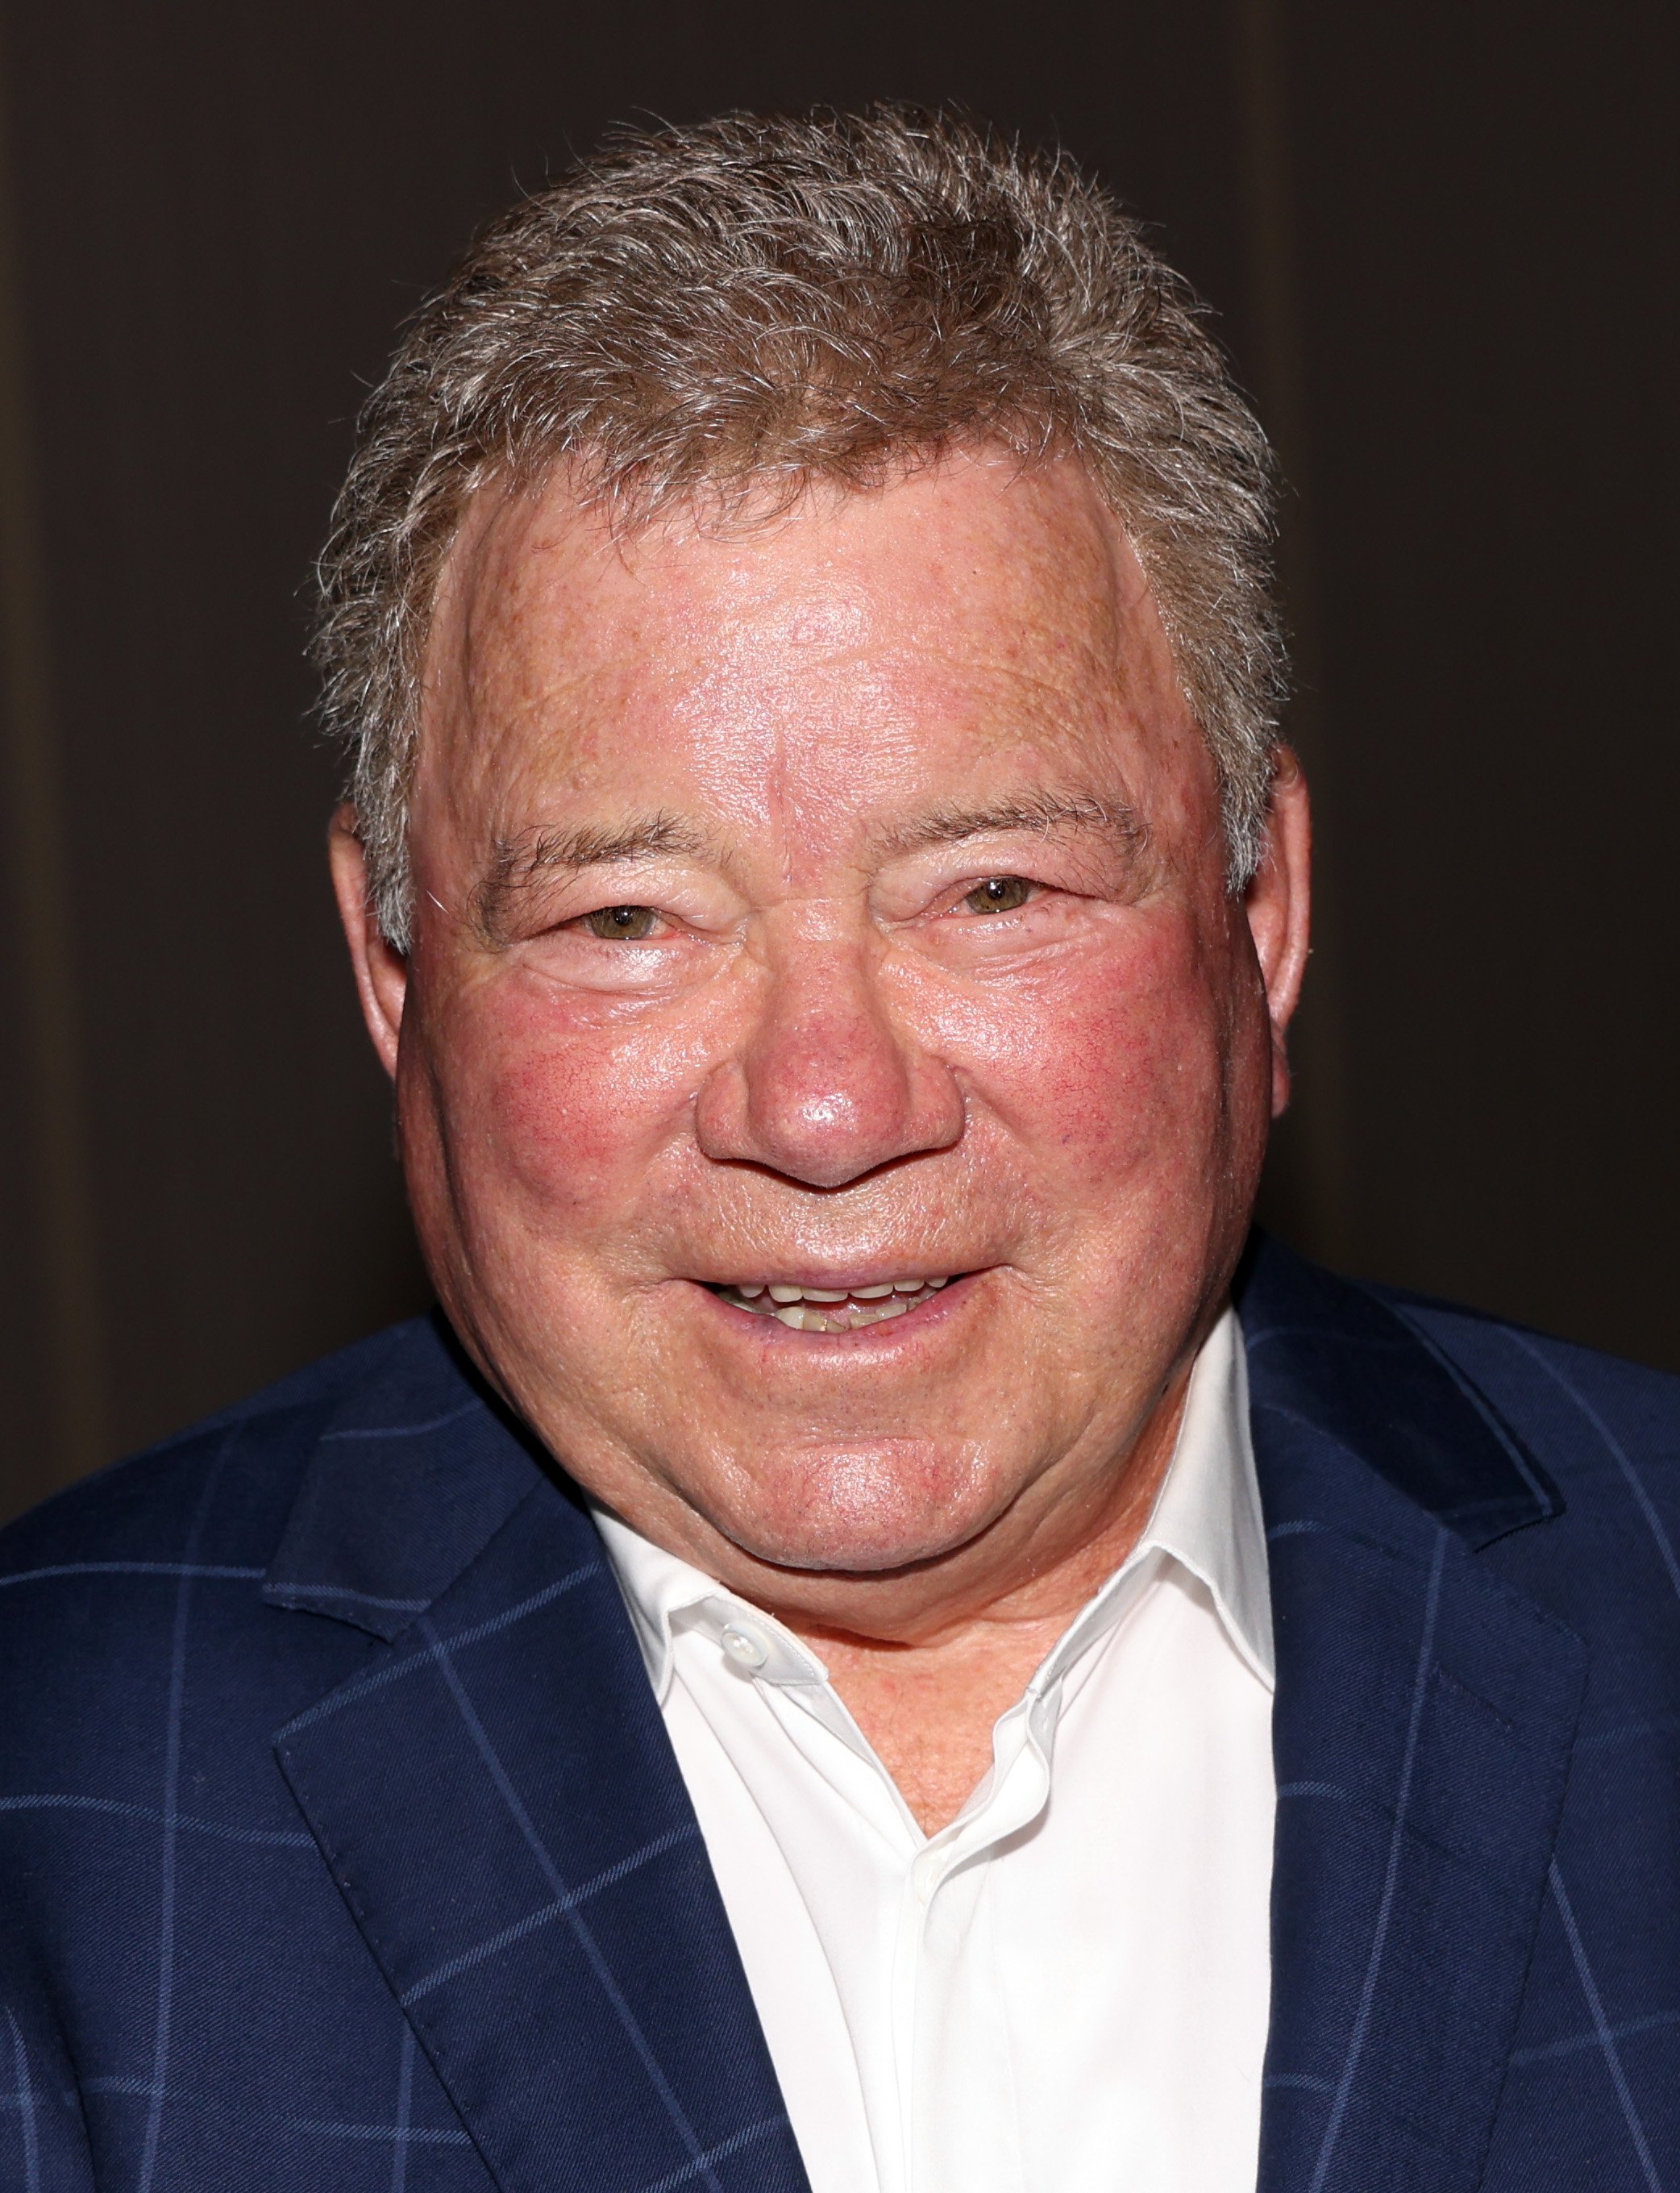 William Shatner at the 26th Annual Jack Webb Awards Gala on August 20, 2022, in California | Source: Getty Images